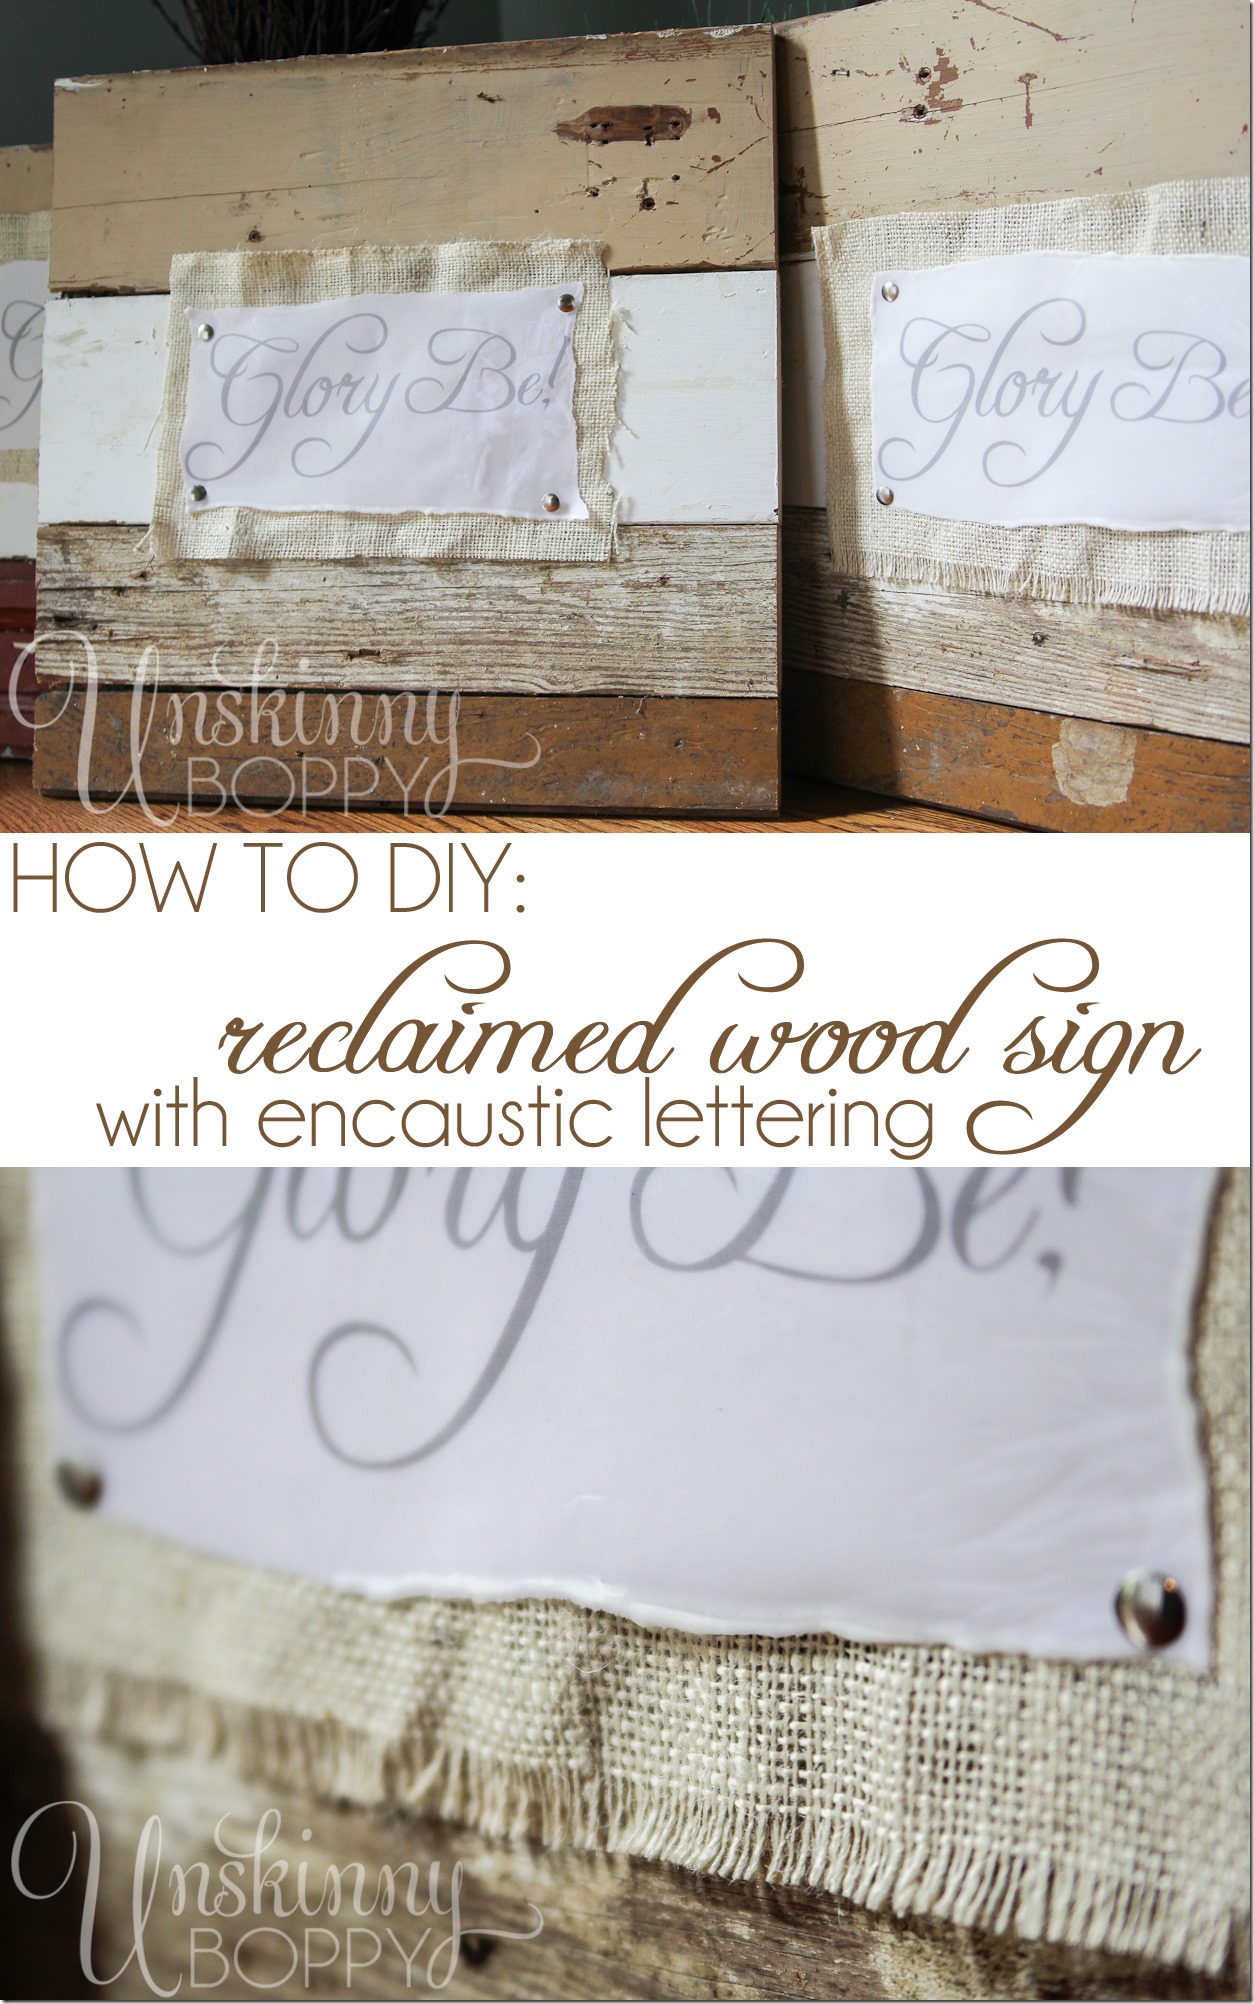 how to diy a reclaimed wood sign with encaustic lettering